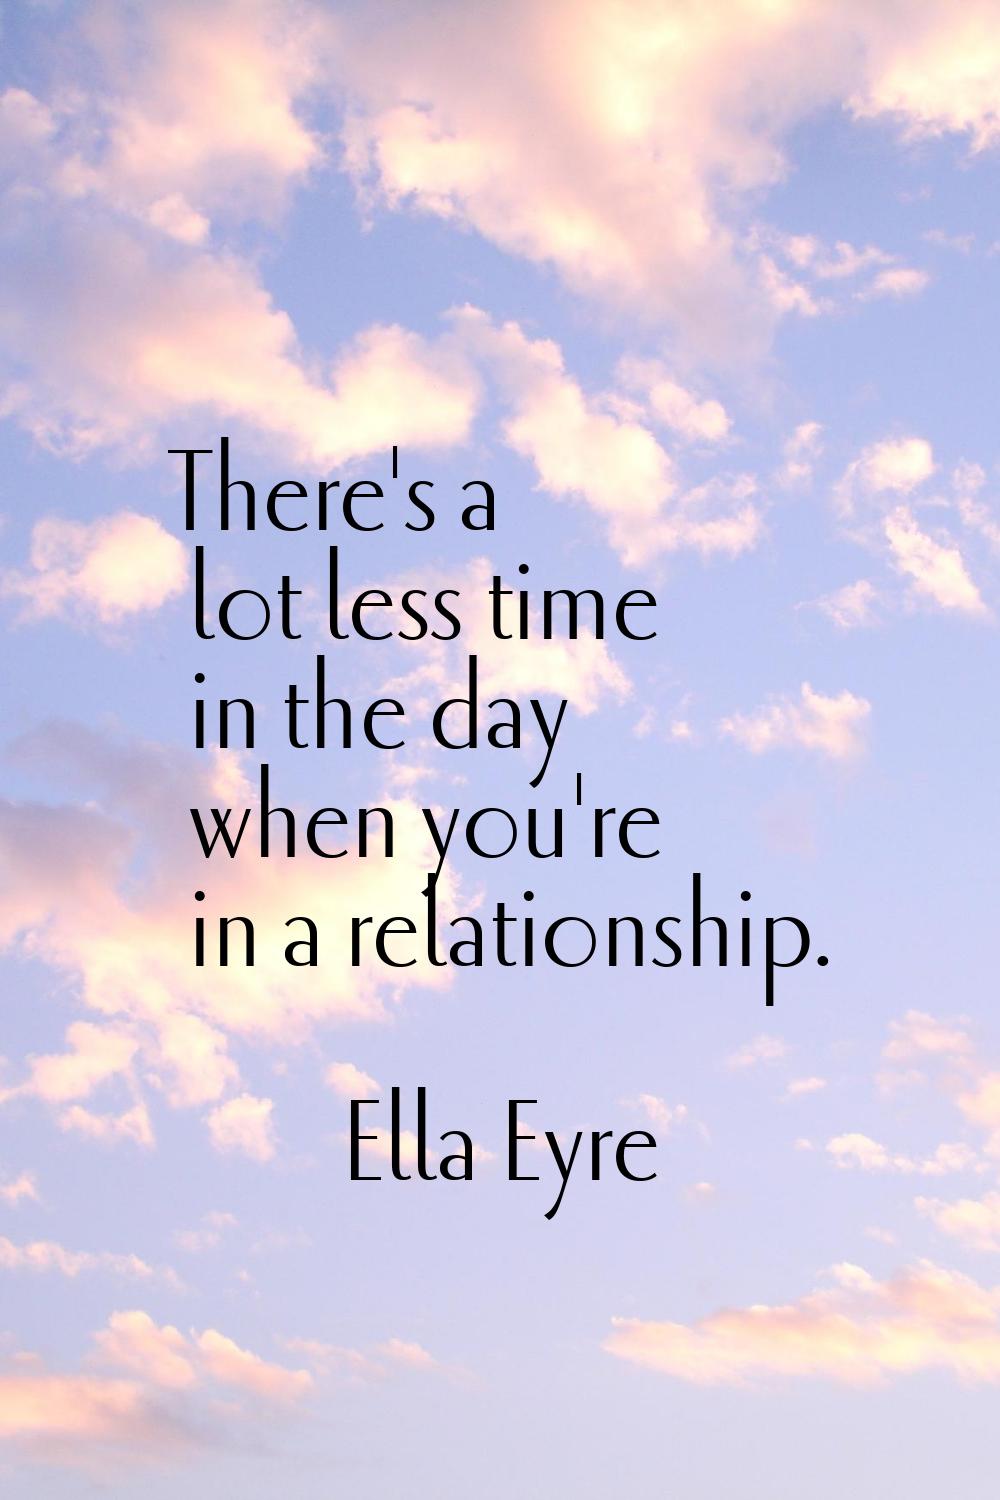 There's a lot less time in the day when you're in a relationship.